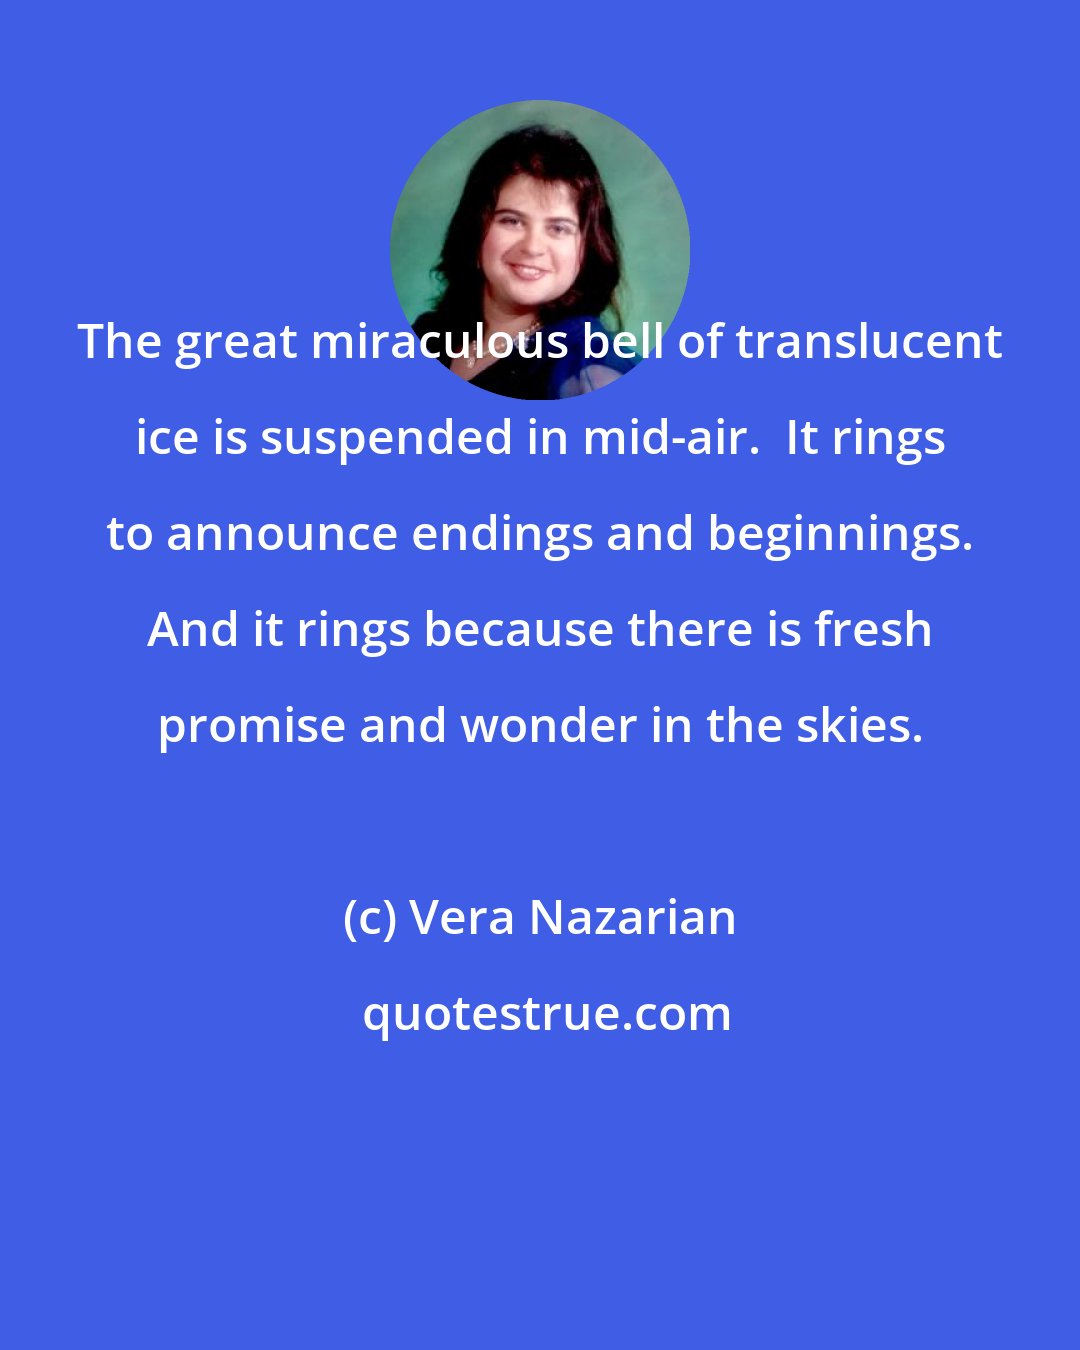 Vera Nazarian: The great miraculous bell of translucent ice is suspended in mid-air.  It rings to announce endings and beginnings. And it rings because there is fresh promise and wonder in the skies.